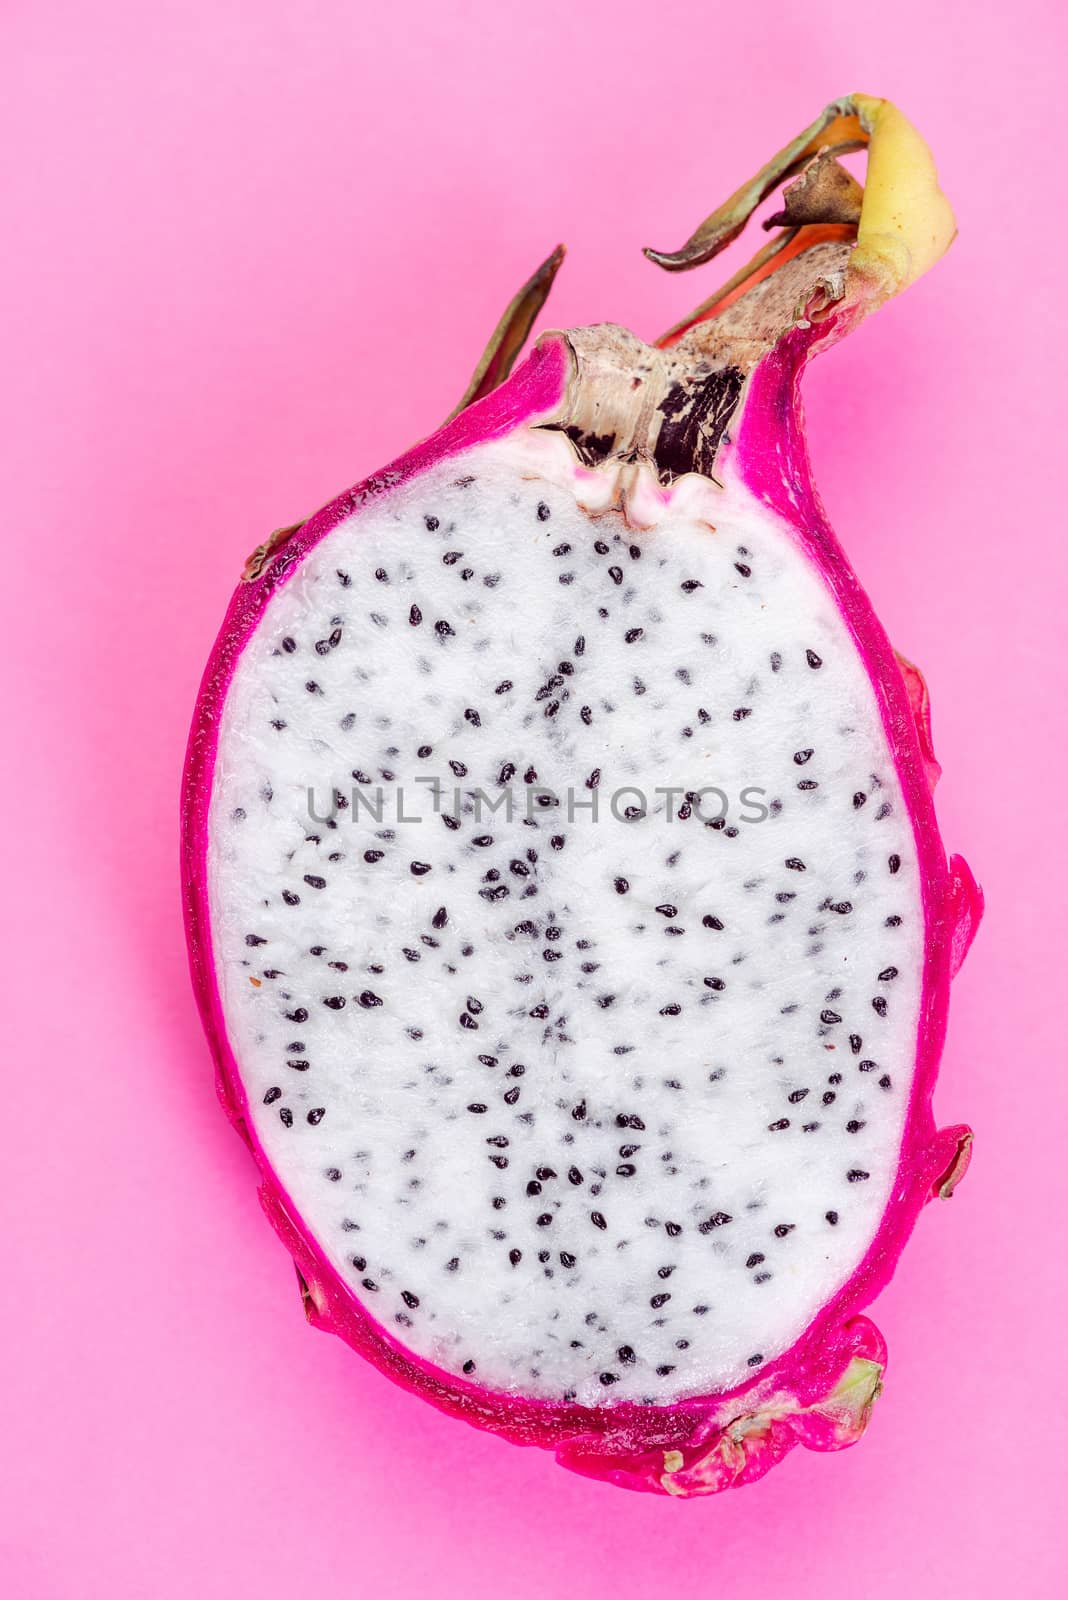 Pitahaya or Dragon Fruit Cut in Half on Pink Pastel Background.  by merc67